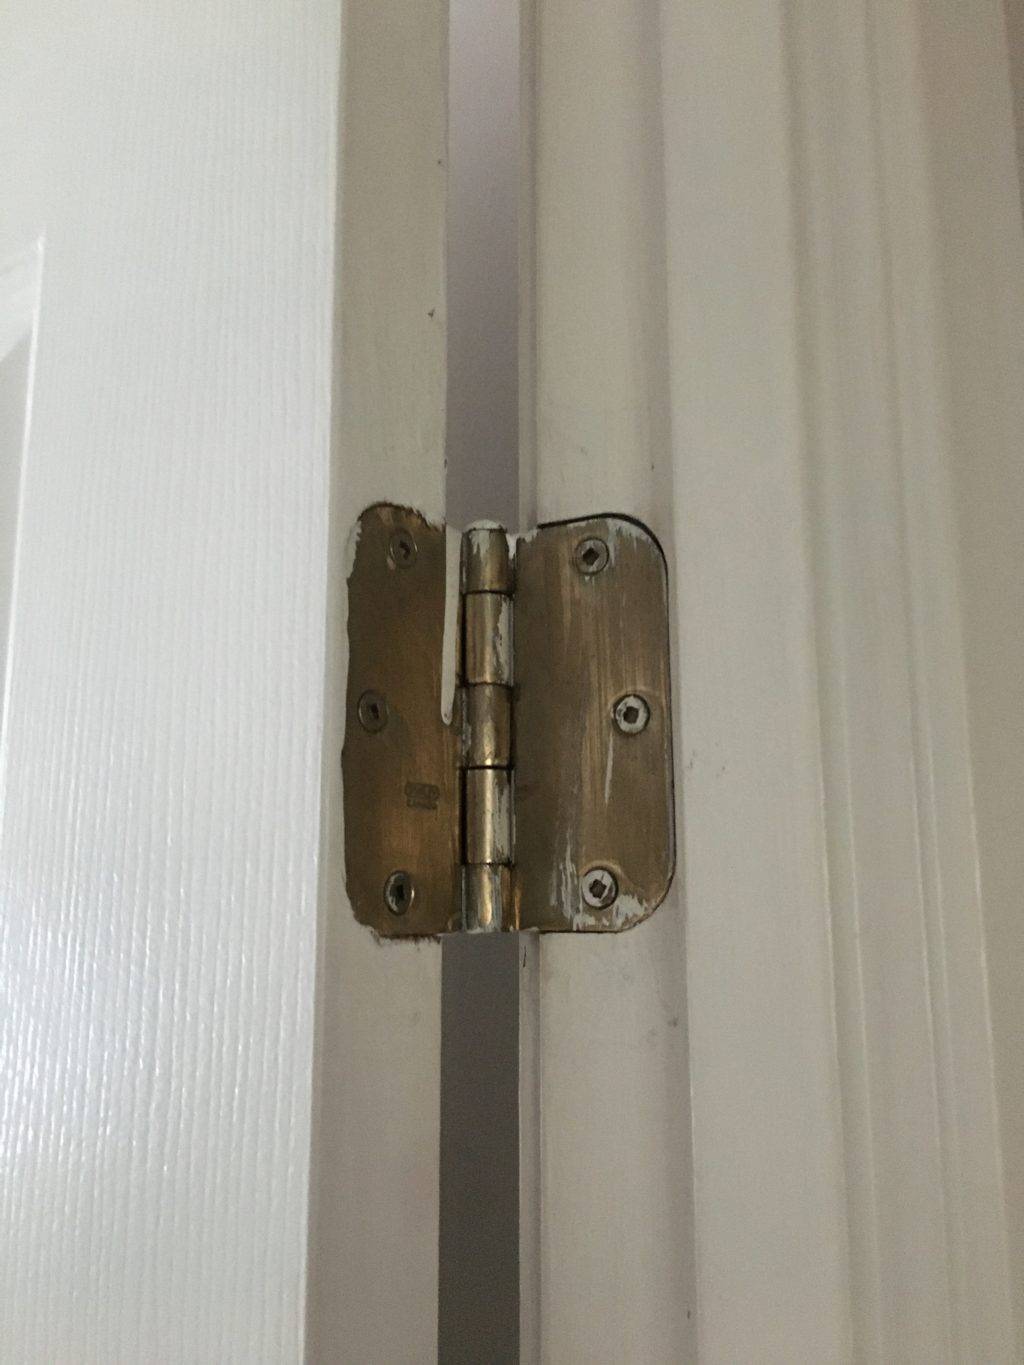 Misaligned Door Hinges: Here's What You Need to Do (2024)